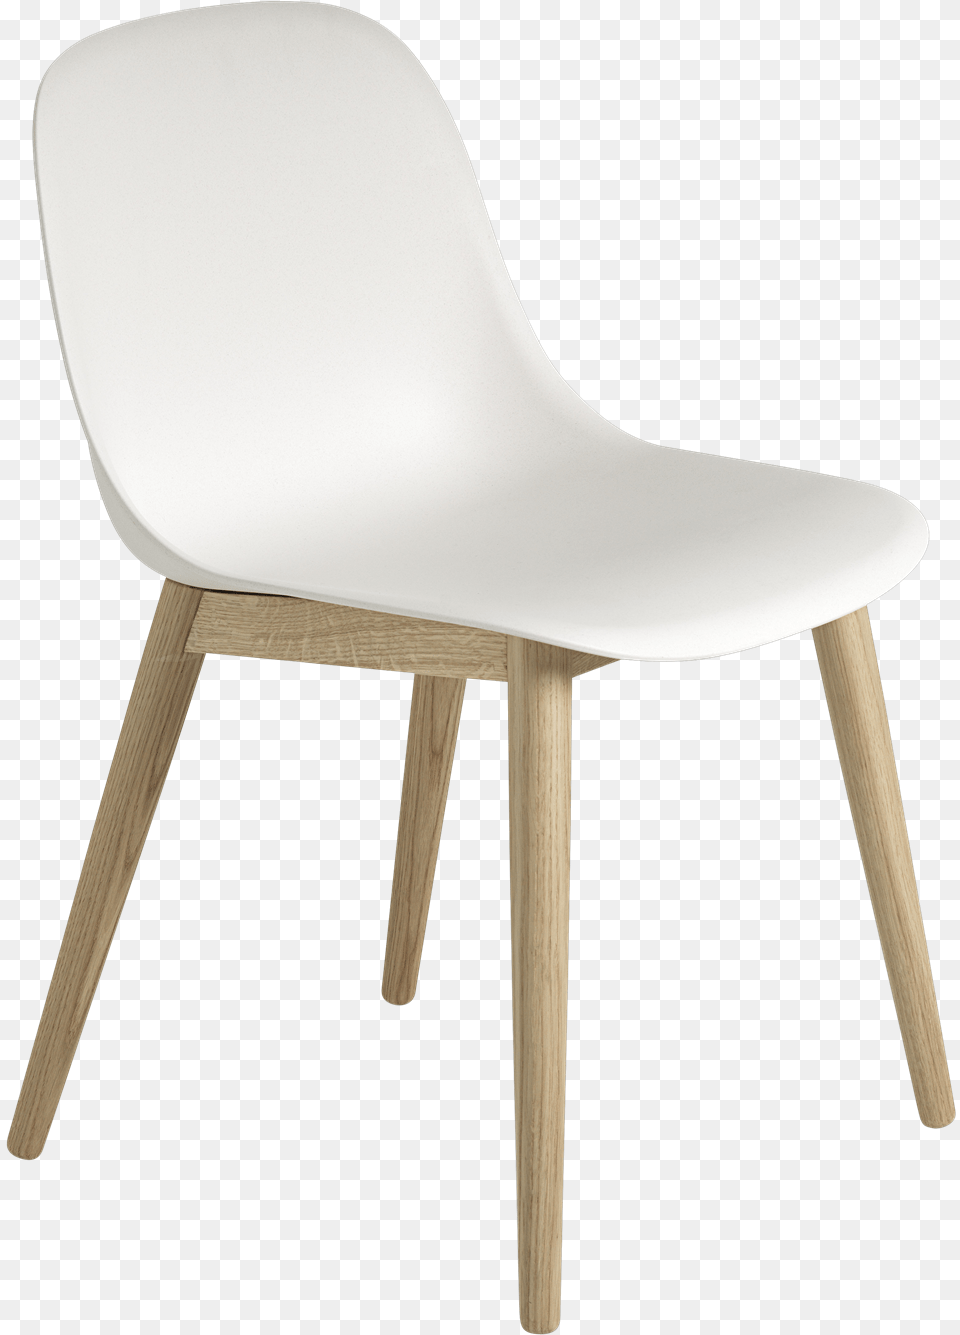 Fiber Side Chair Wood Whiteoak Chair, Furniture, Plywood Png